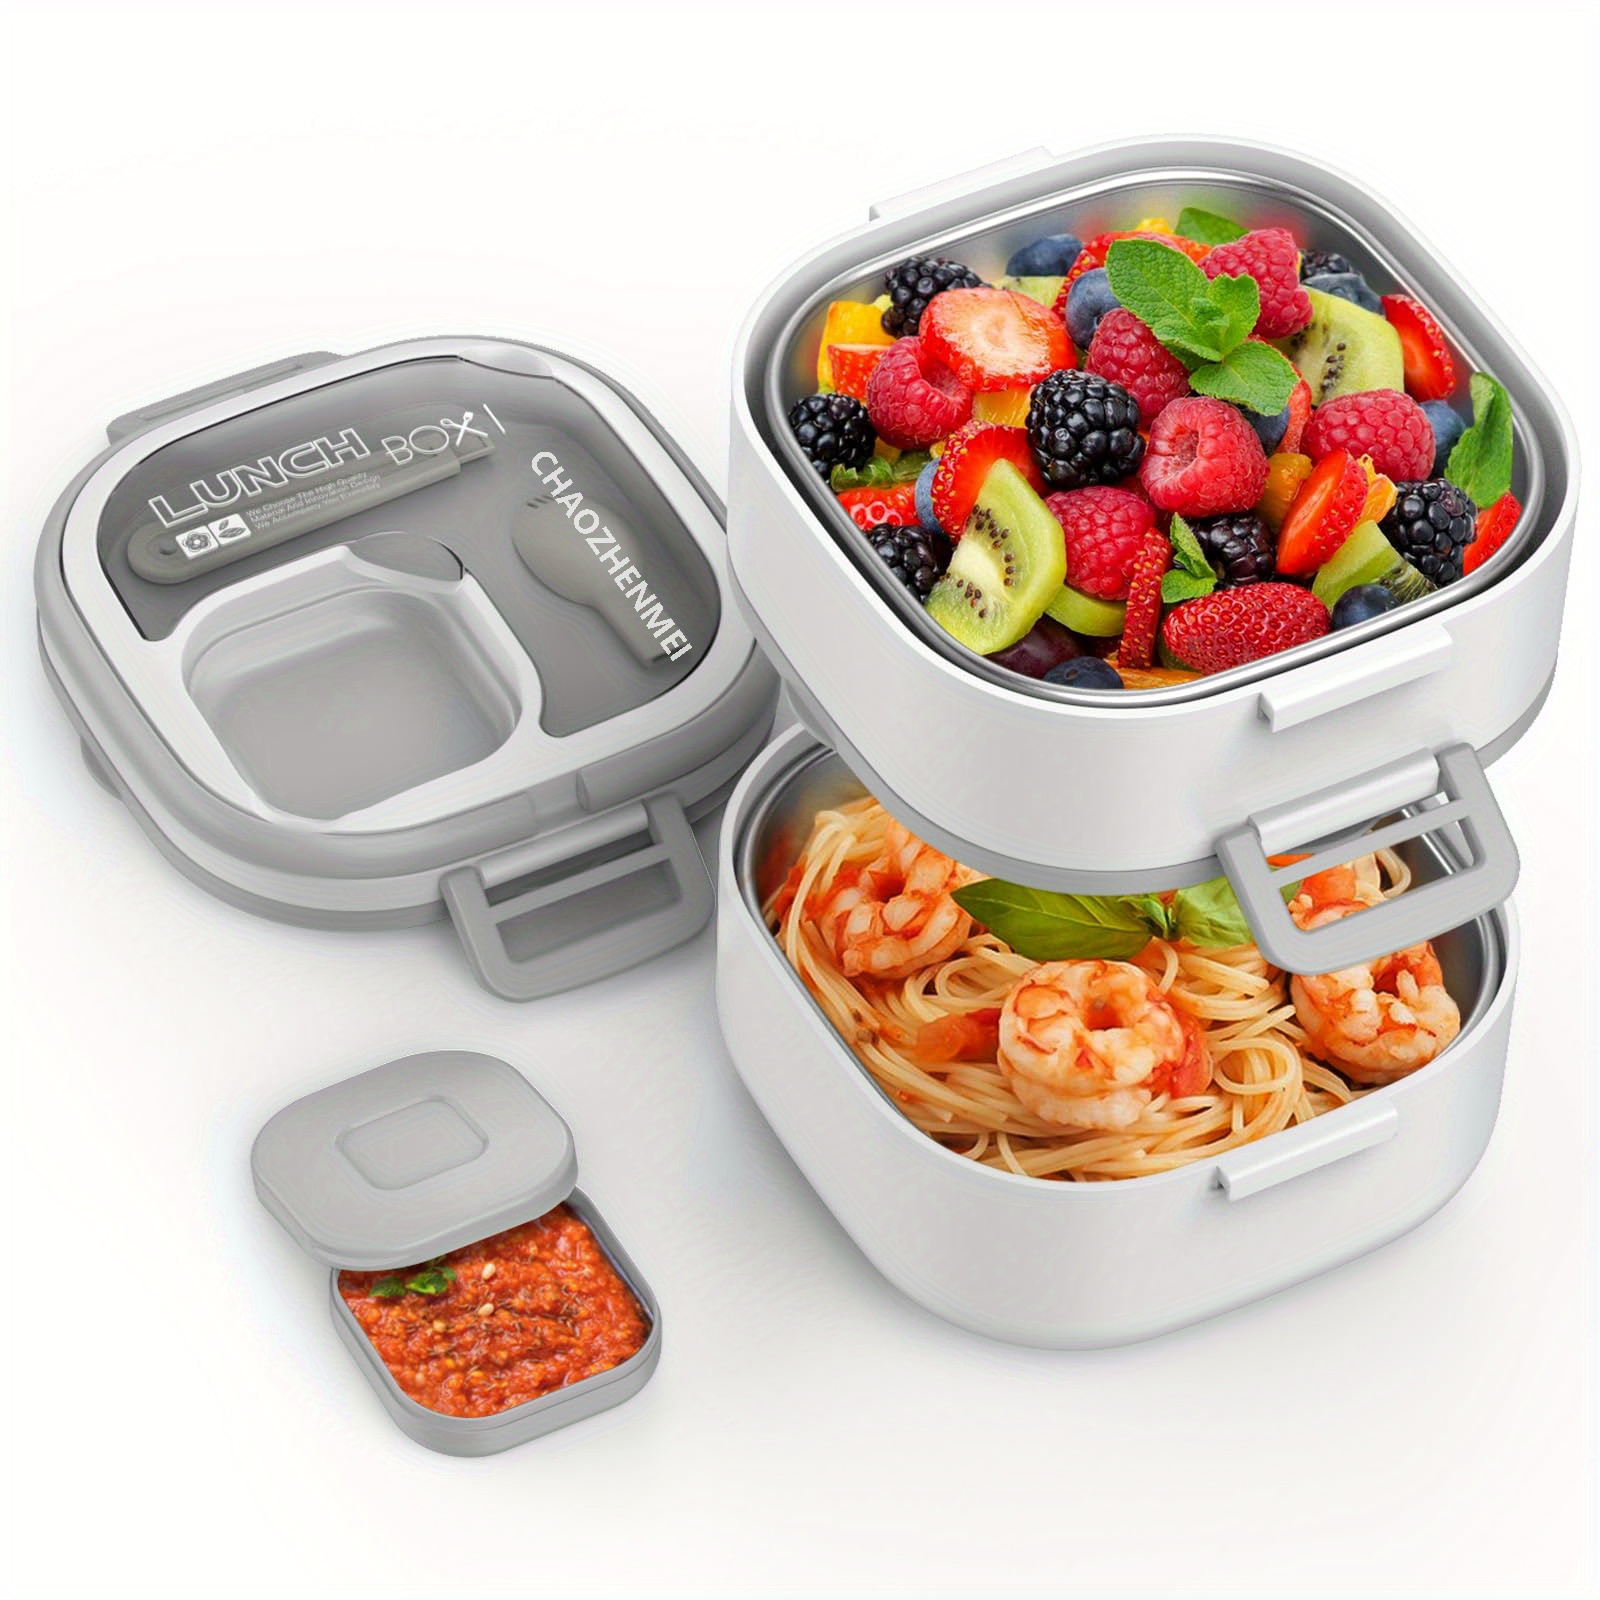 NEW Vacuum Insulated Stainless Steel 3 Layer Bento Lunch Box Insulated –  Aimex Australia